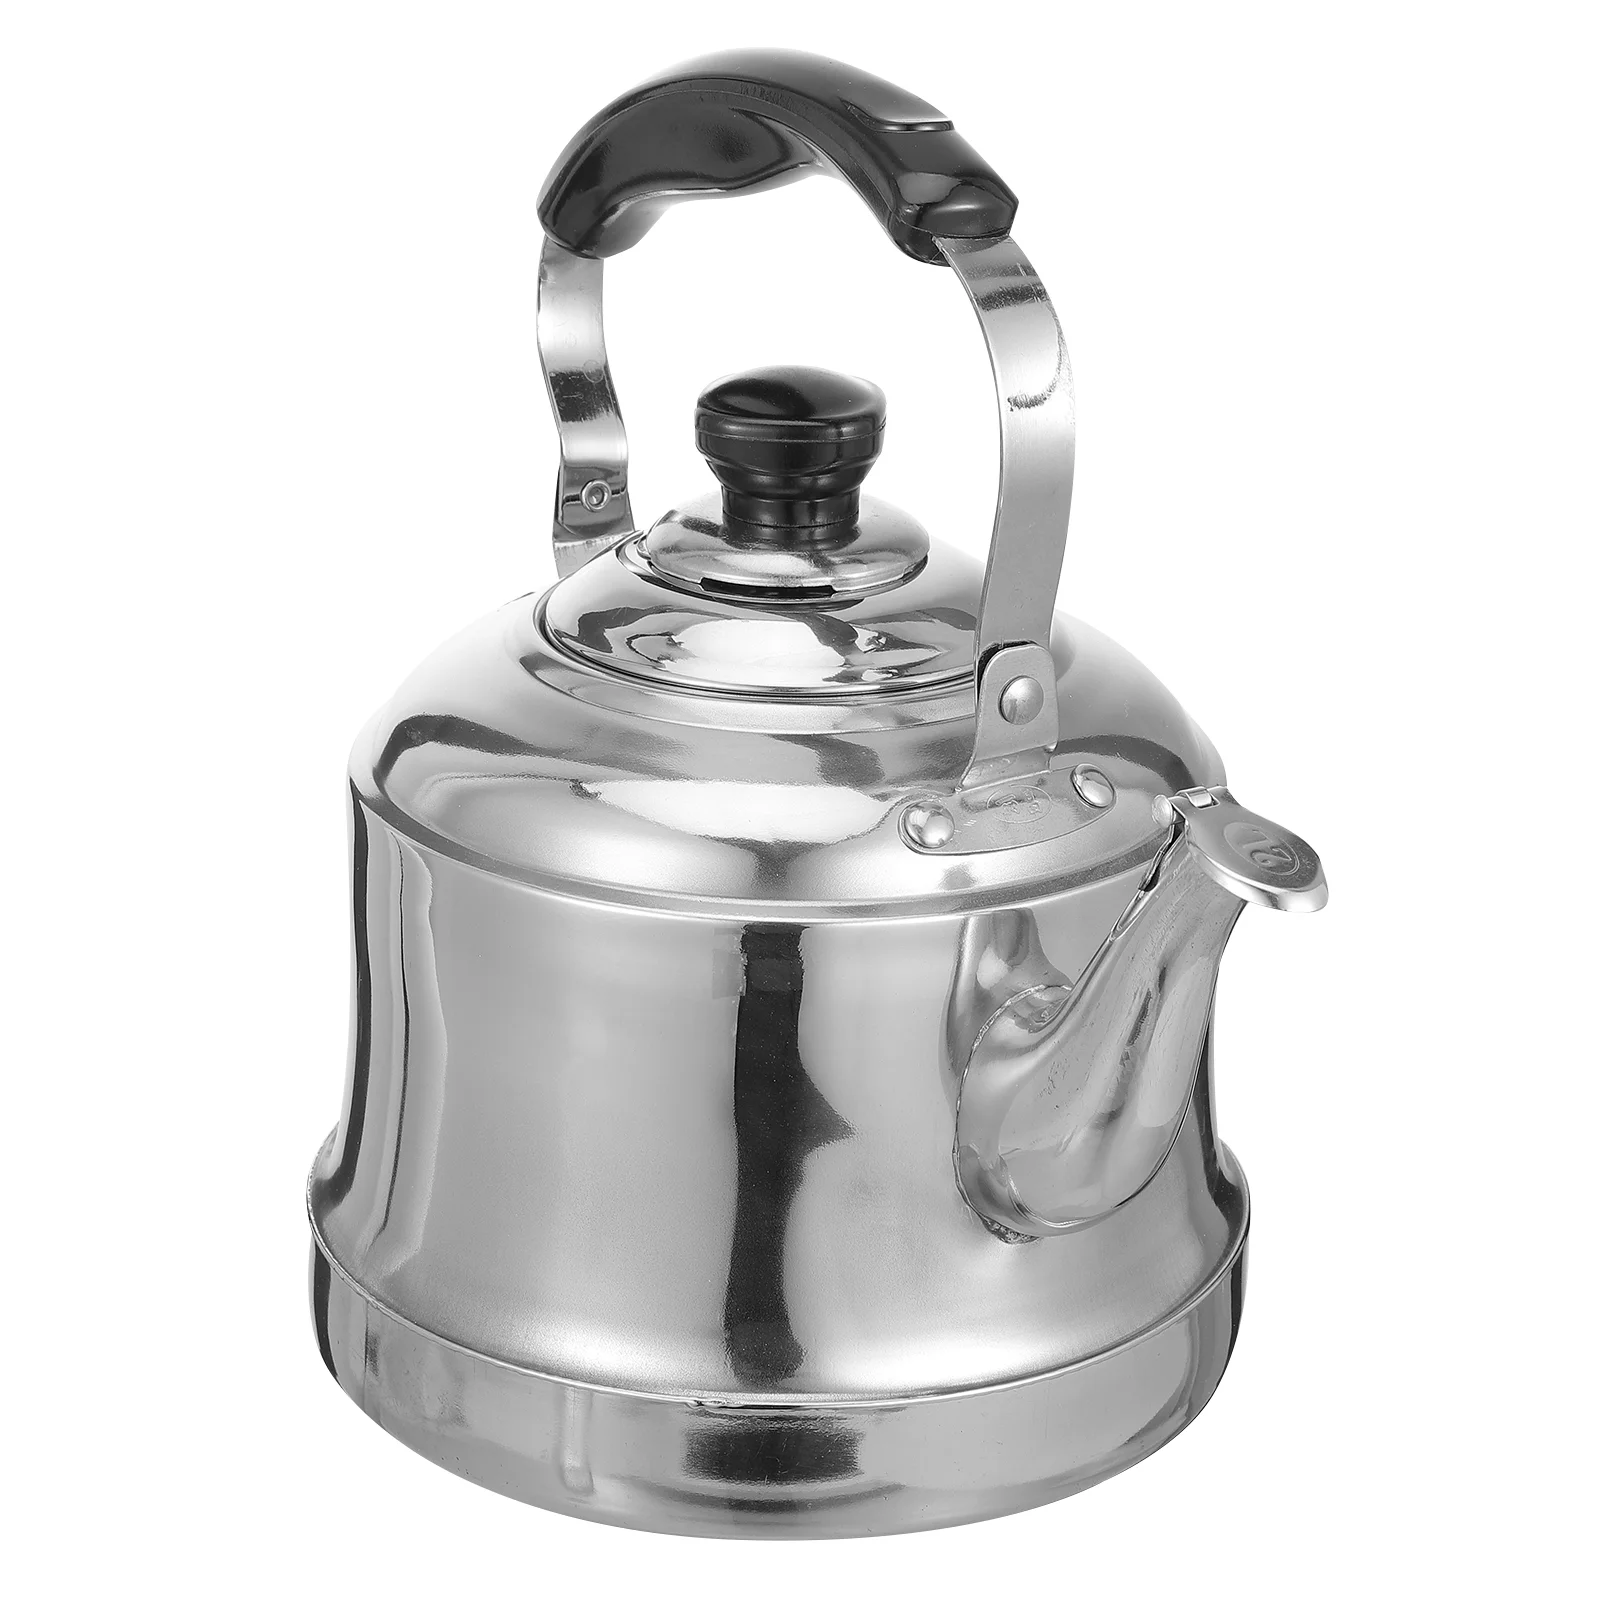 

Stainless Steel Kettle Gas Whistling Sounding Water Tea Boiling Espresso Maker Stovetop Coffee Pot